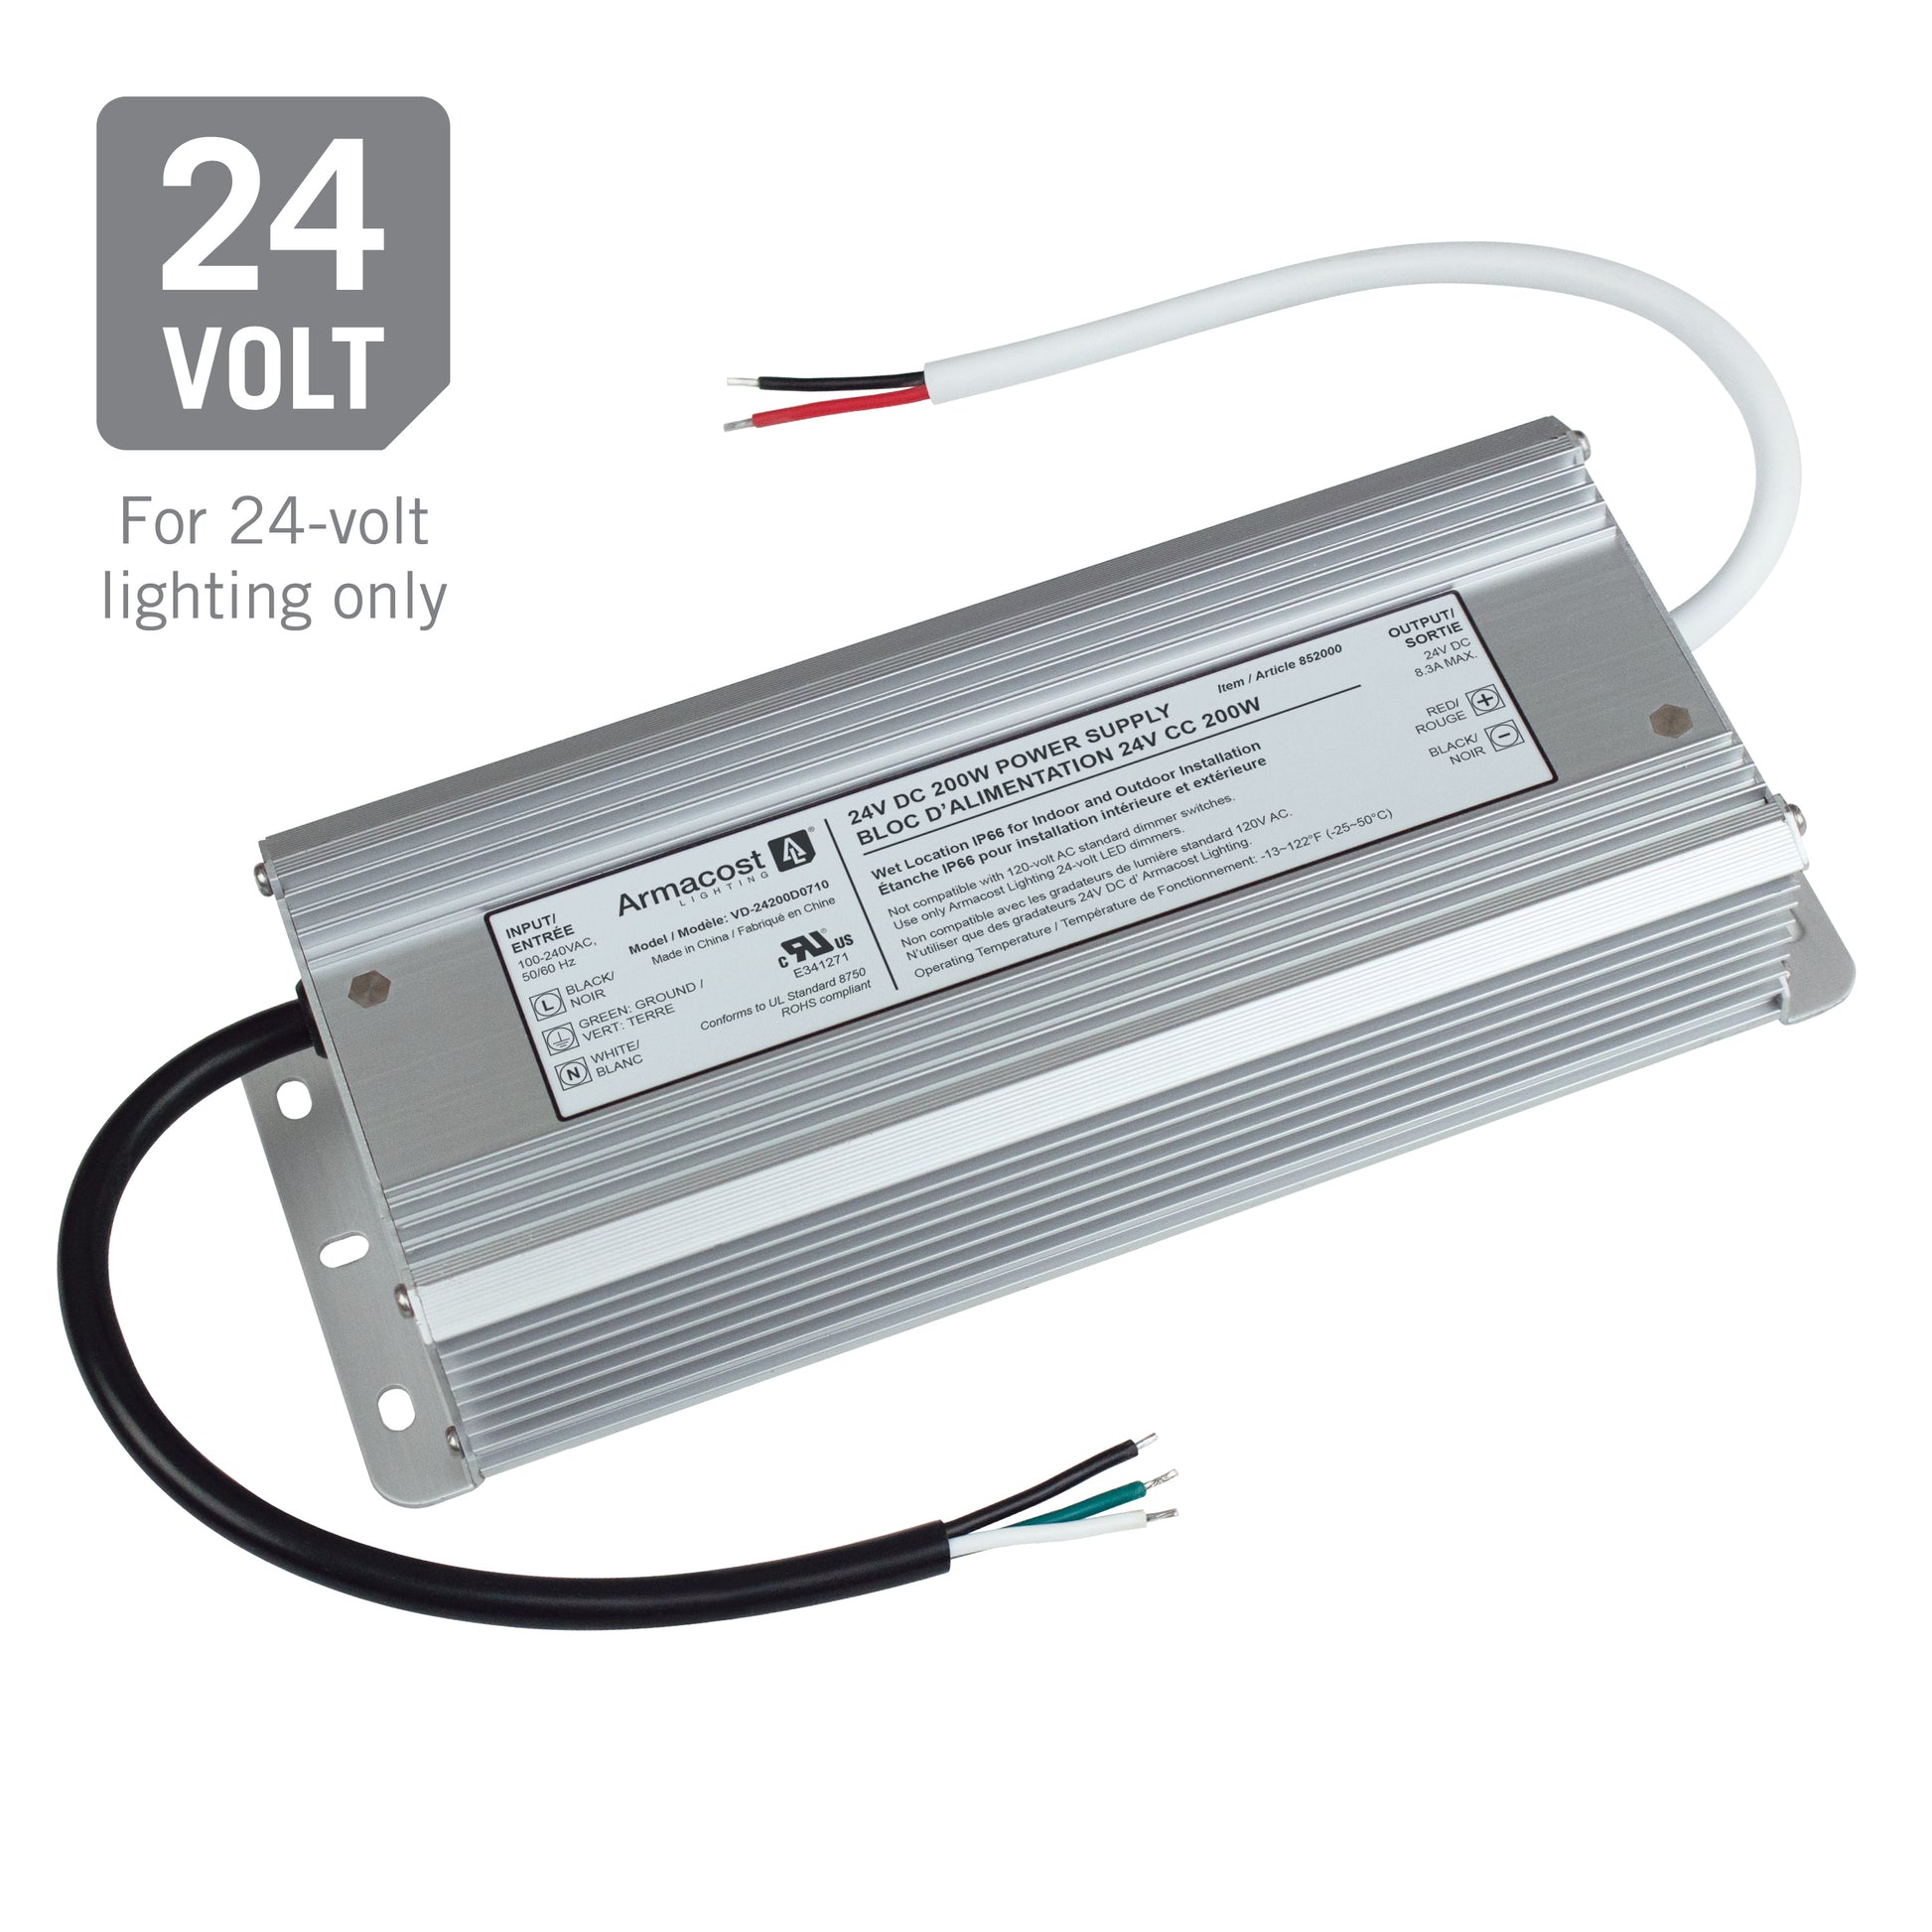 Waterproof 12 volt driver 24W for led lights Compatible with a